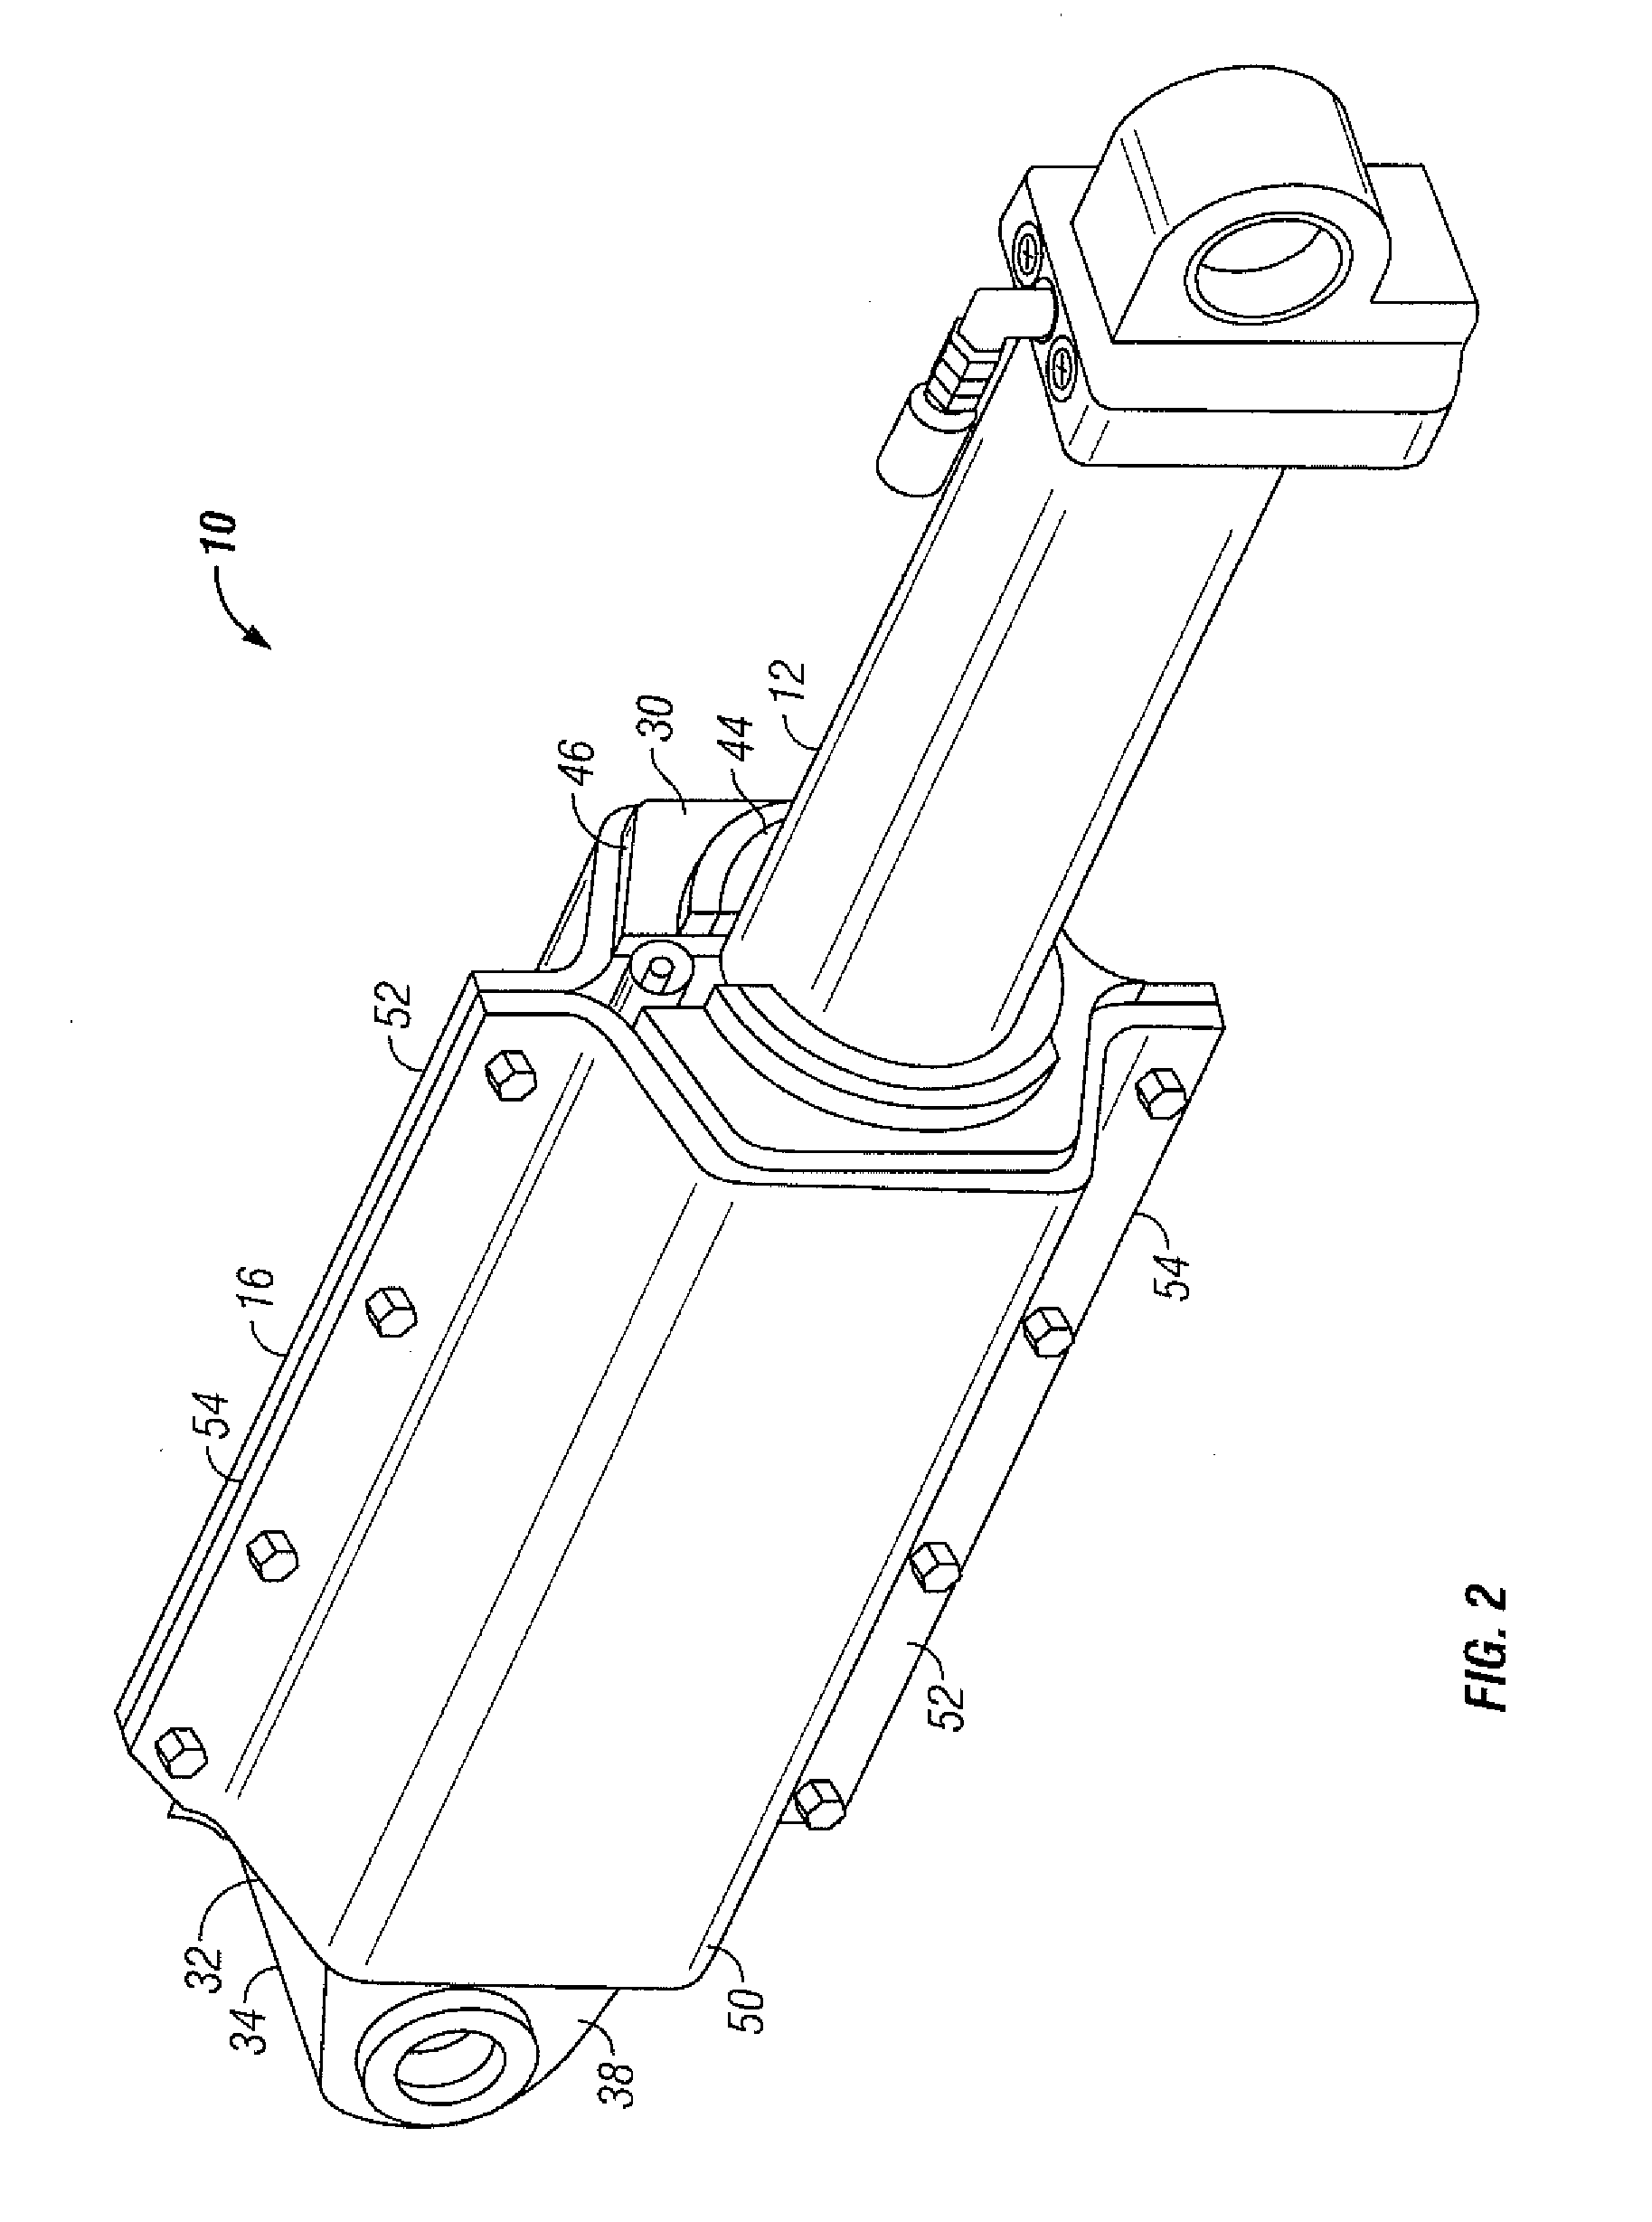 Actuator with a protective sleeve for a piston